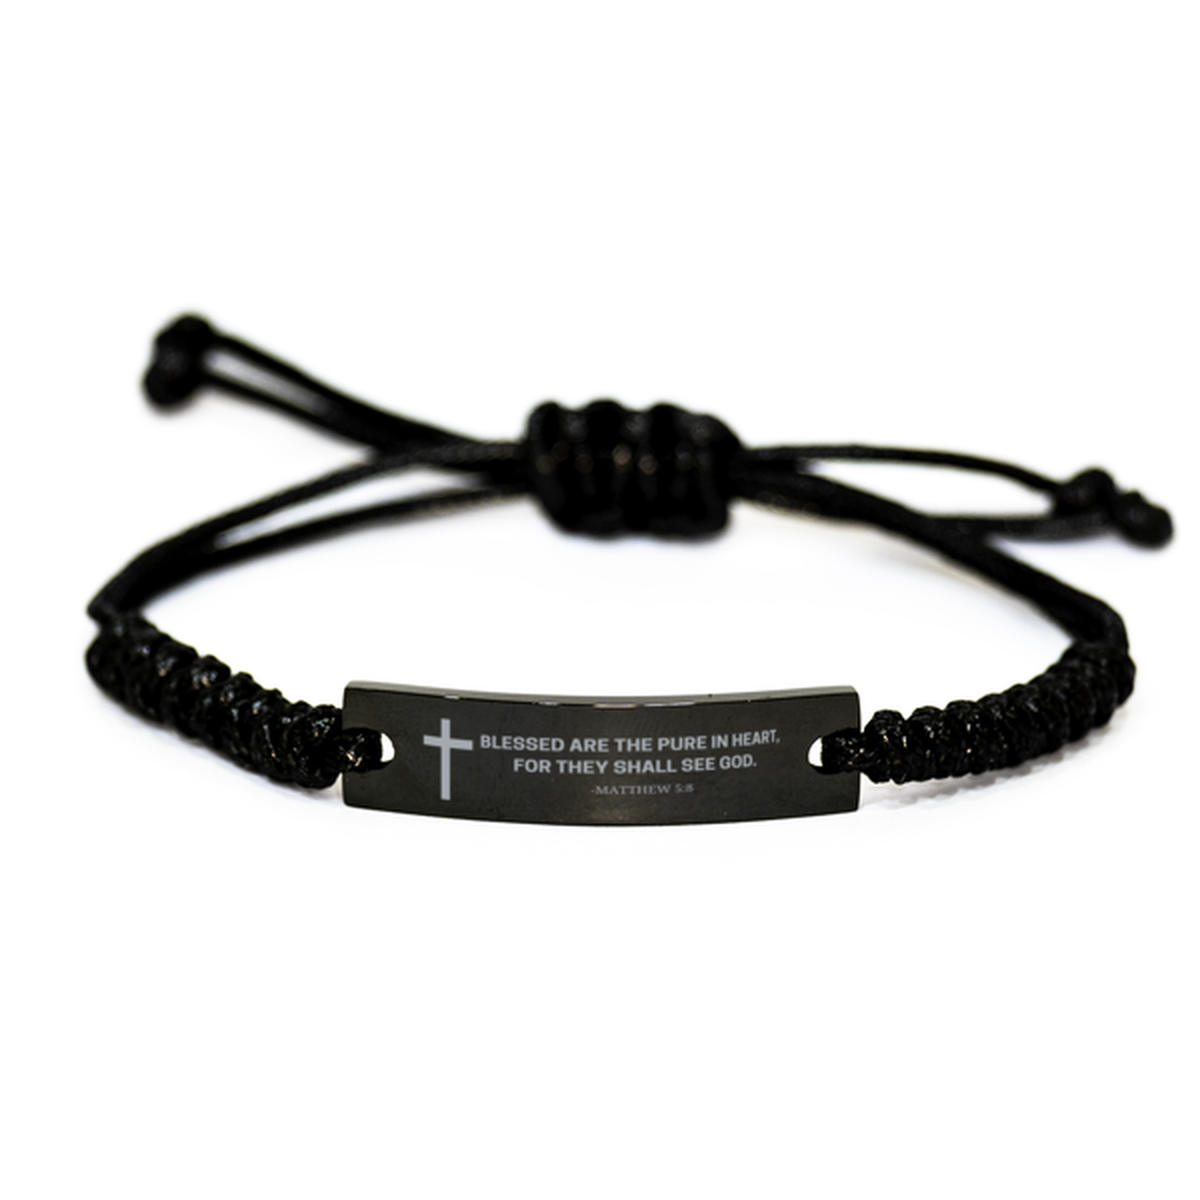 Baptism Gifts For Teenage Boys Girls, Christian Bible Verse Black Rope Bracelet, Blessed are the pure in heart, Catholic Confirmation Gifts for Son, Godson, Grandson, Nephew